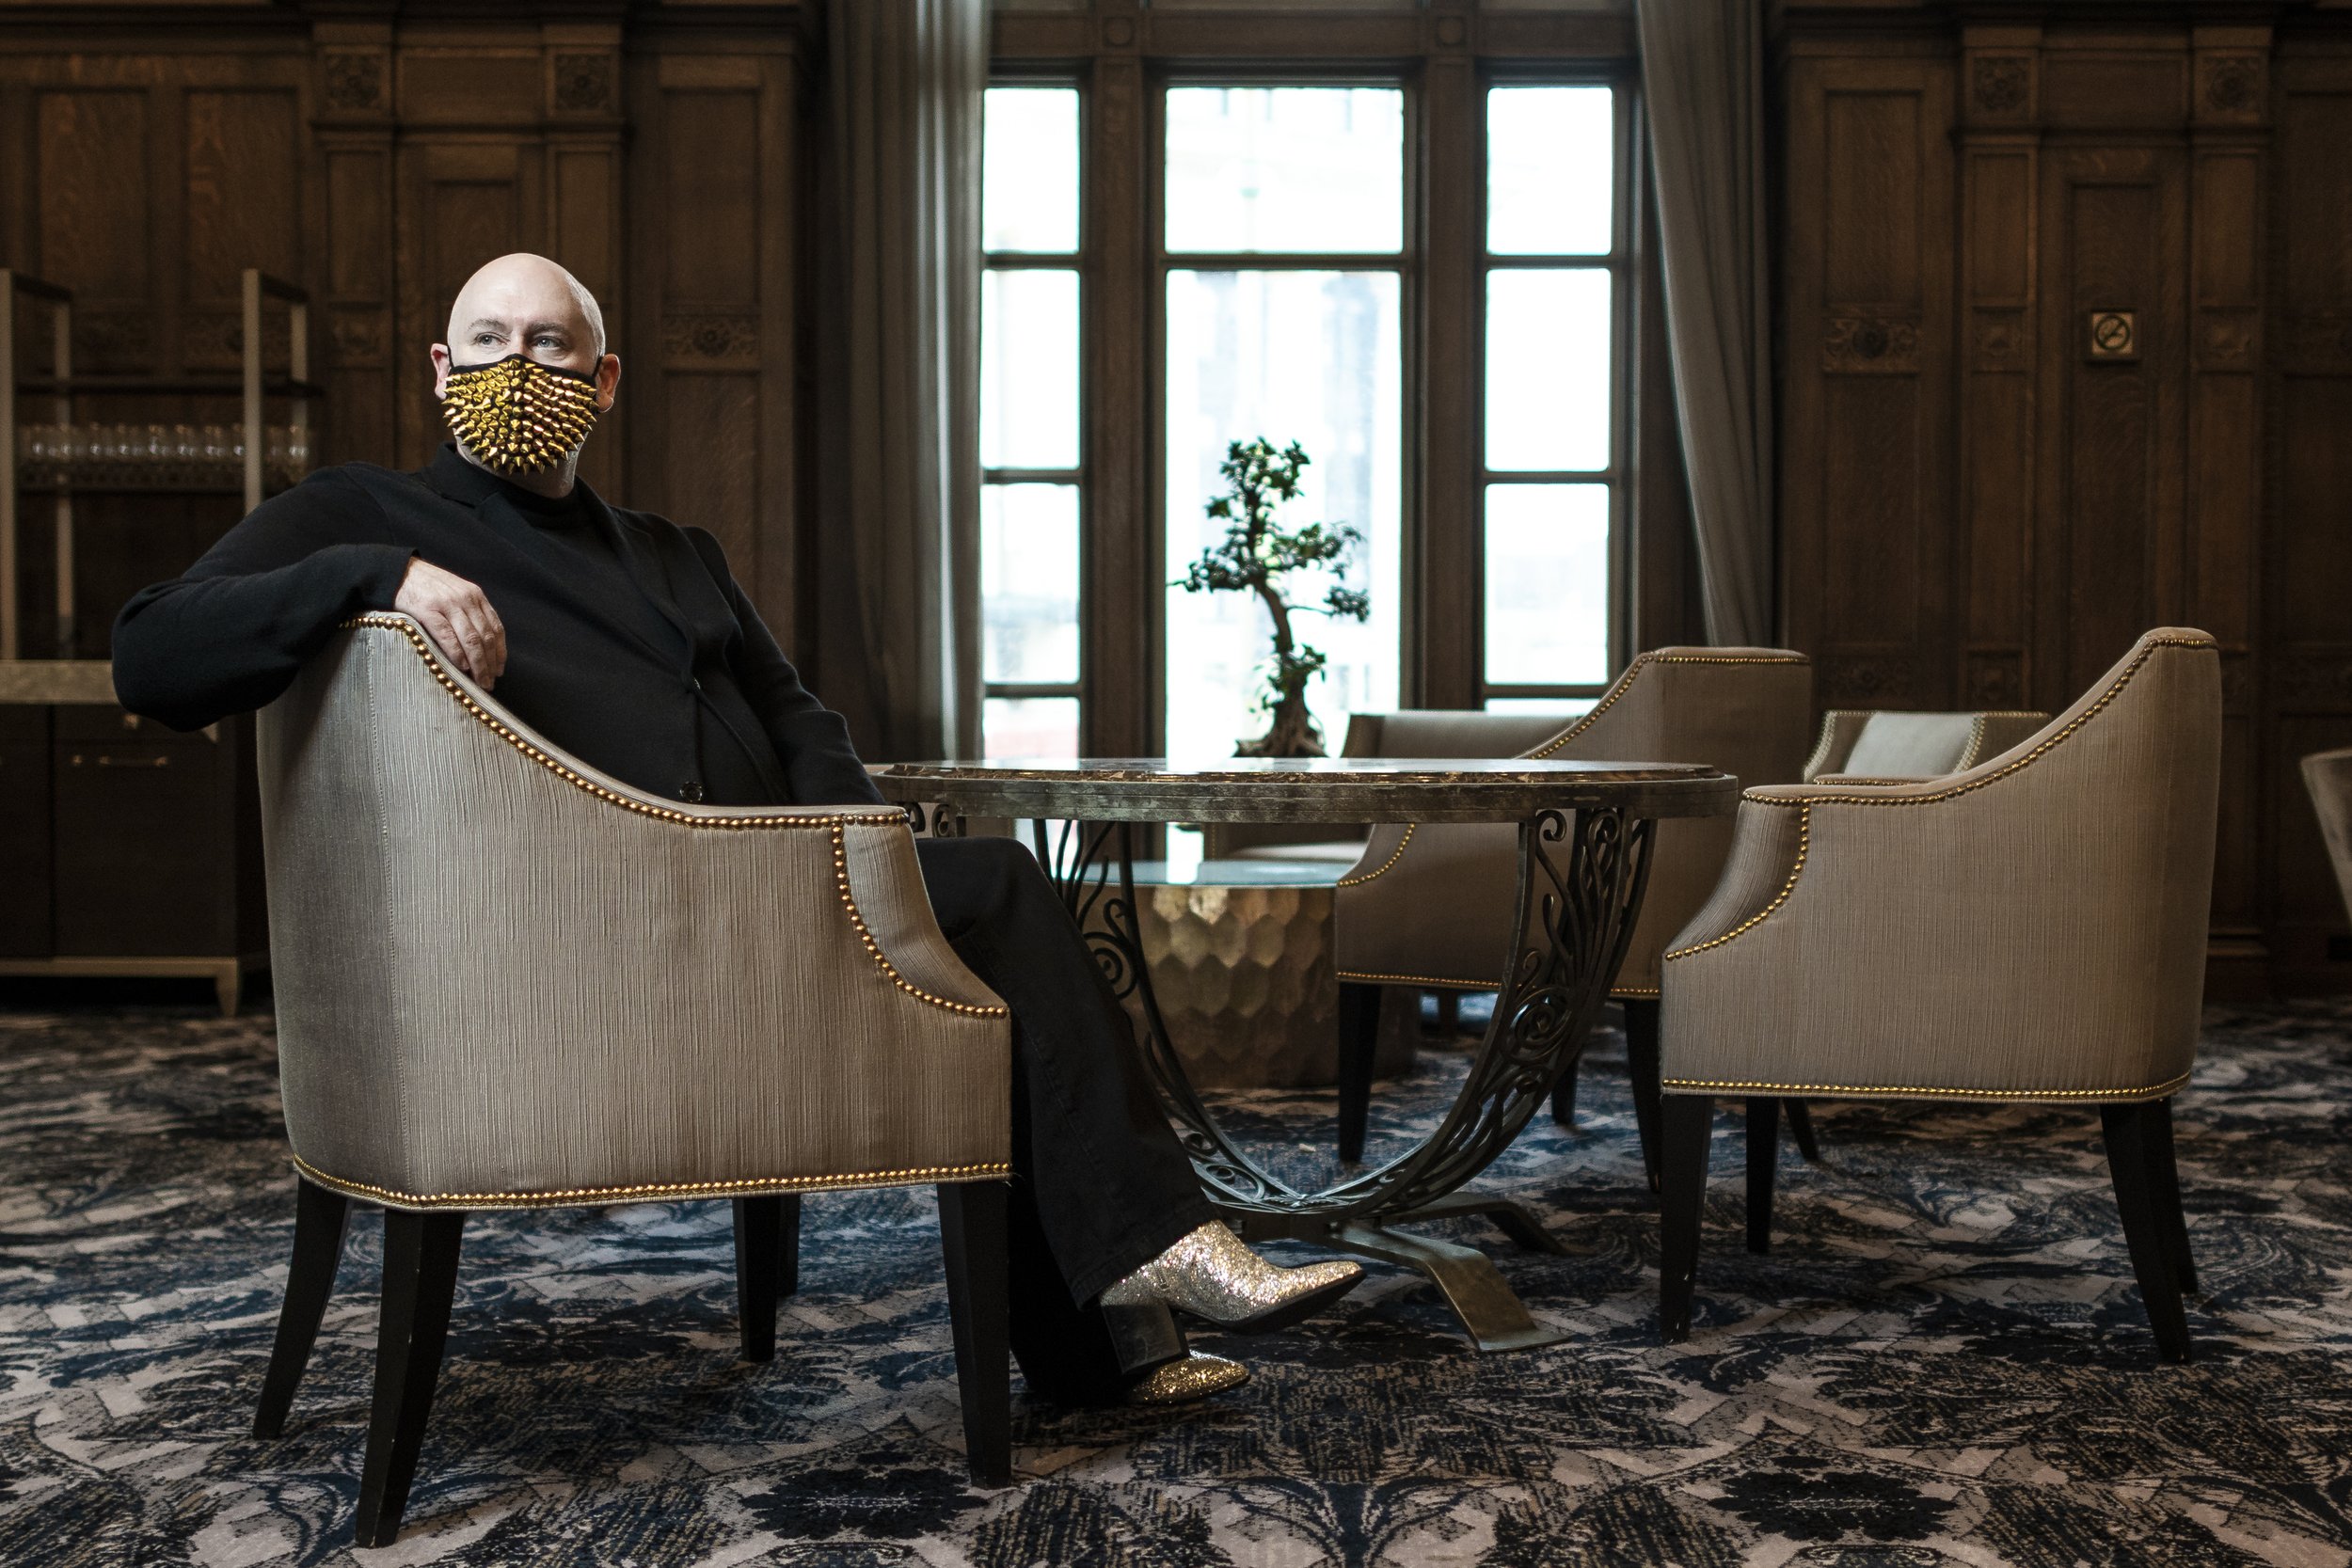  James Jefferson from local creative marketing agency Blackbook Lifestyle is photographed at Chateau Laurier wearing the mask he designed. 